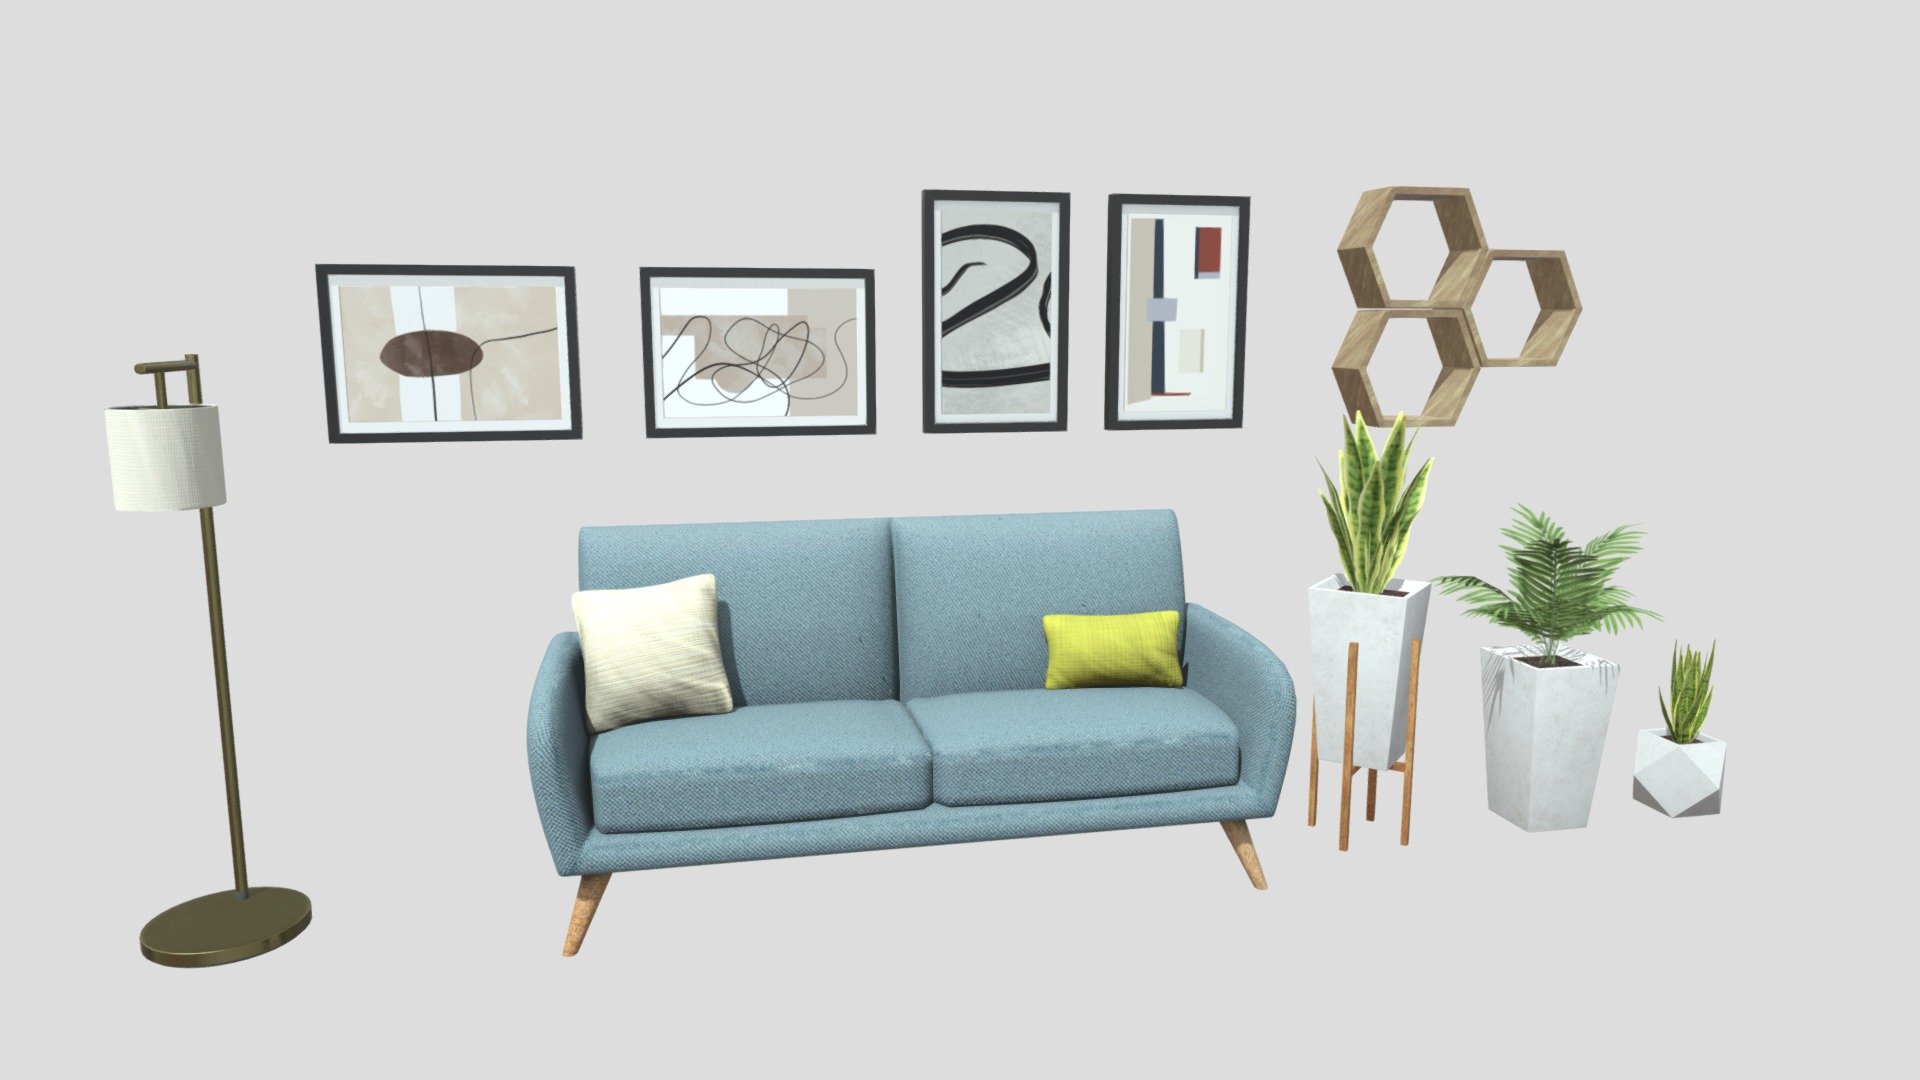 Furniture pack containing:
-Blue couch
-Metal lamp
-4 paintings with diferent designs.
-Wall hexagonal wooden boards.
-3 Indoor plants with diferent pot designs 3d model